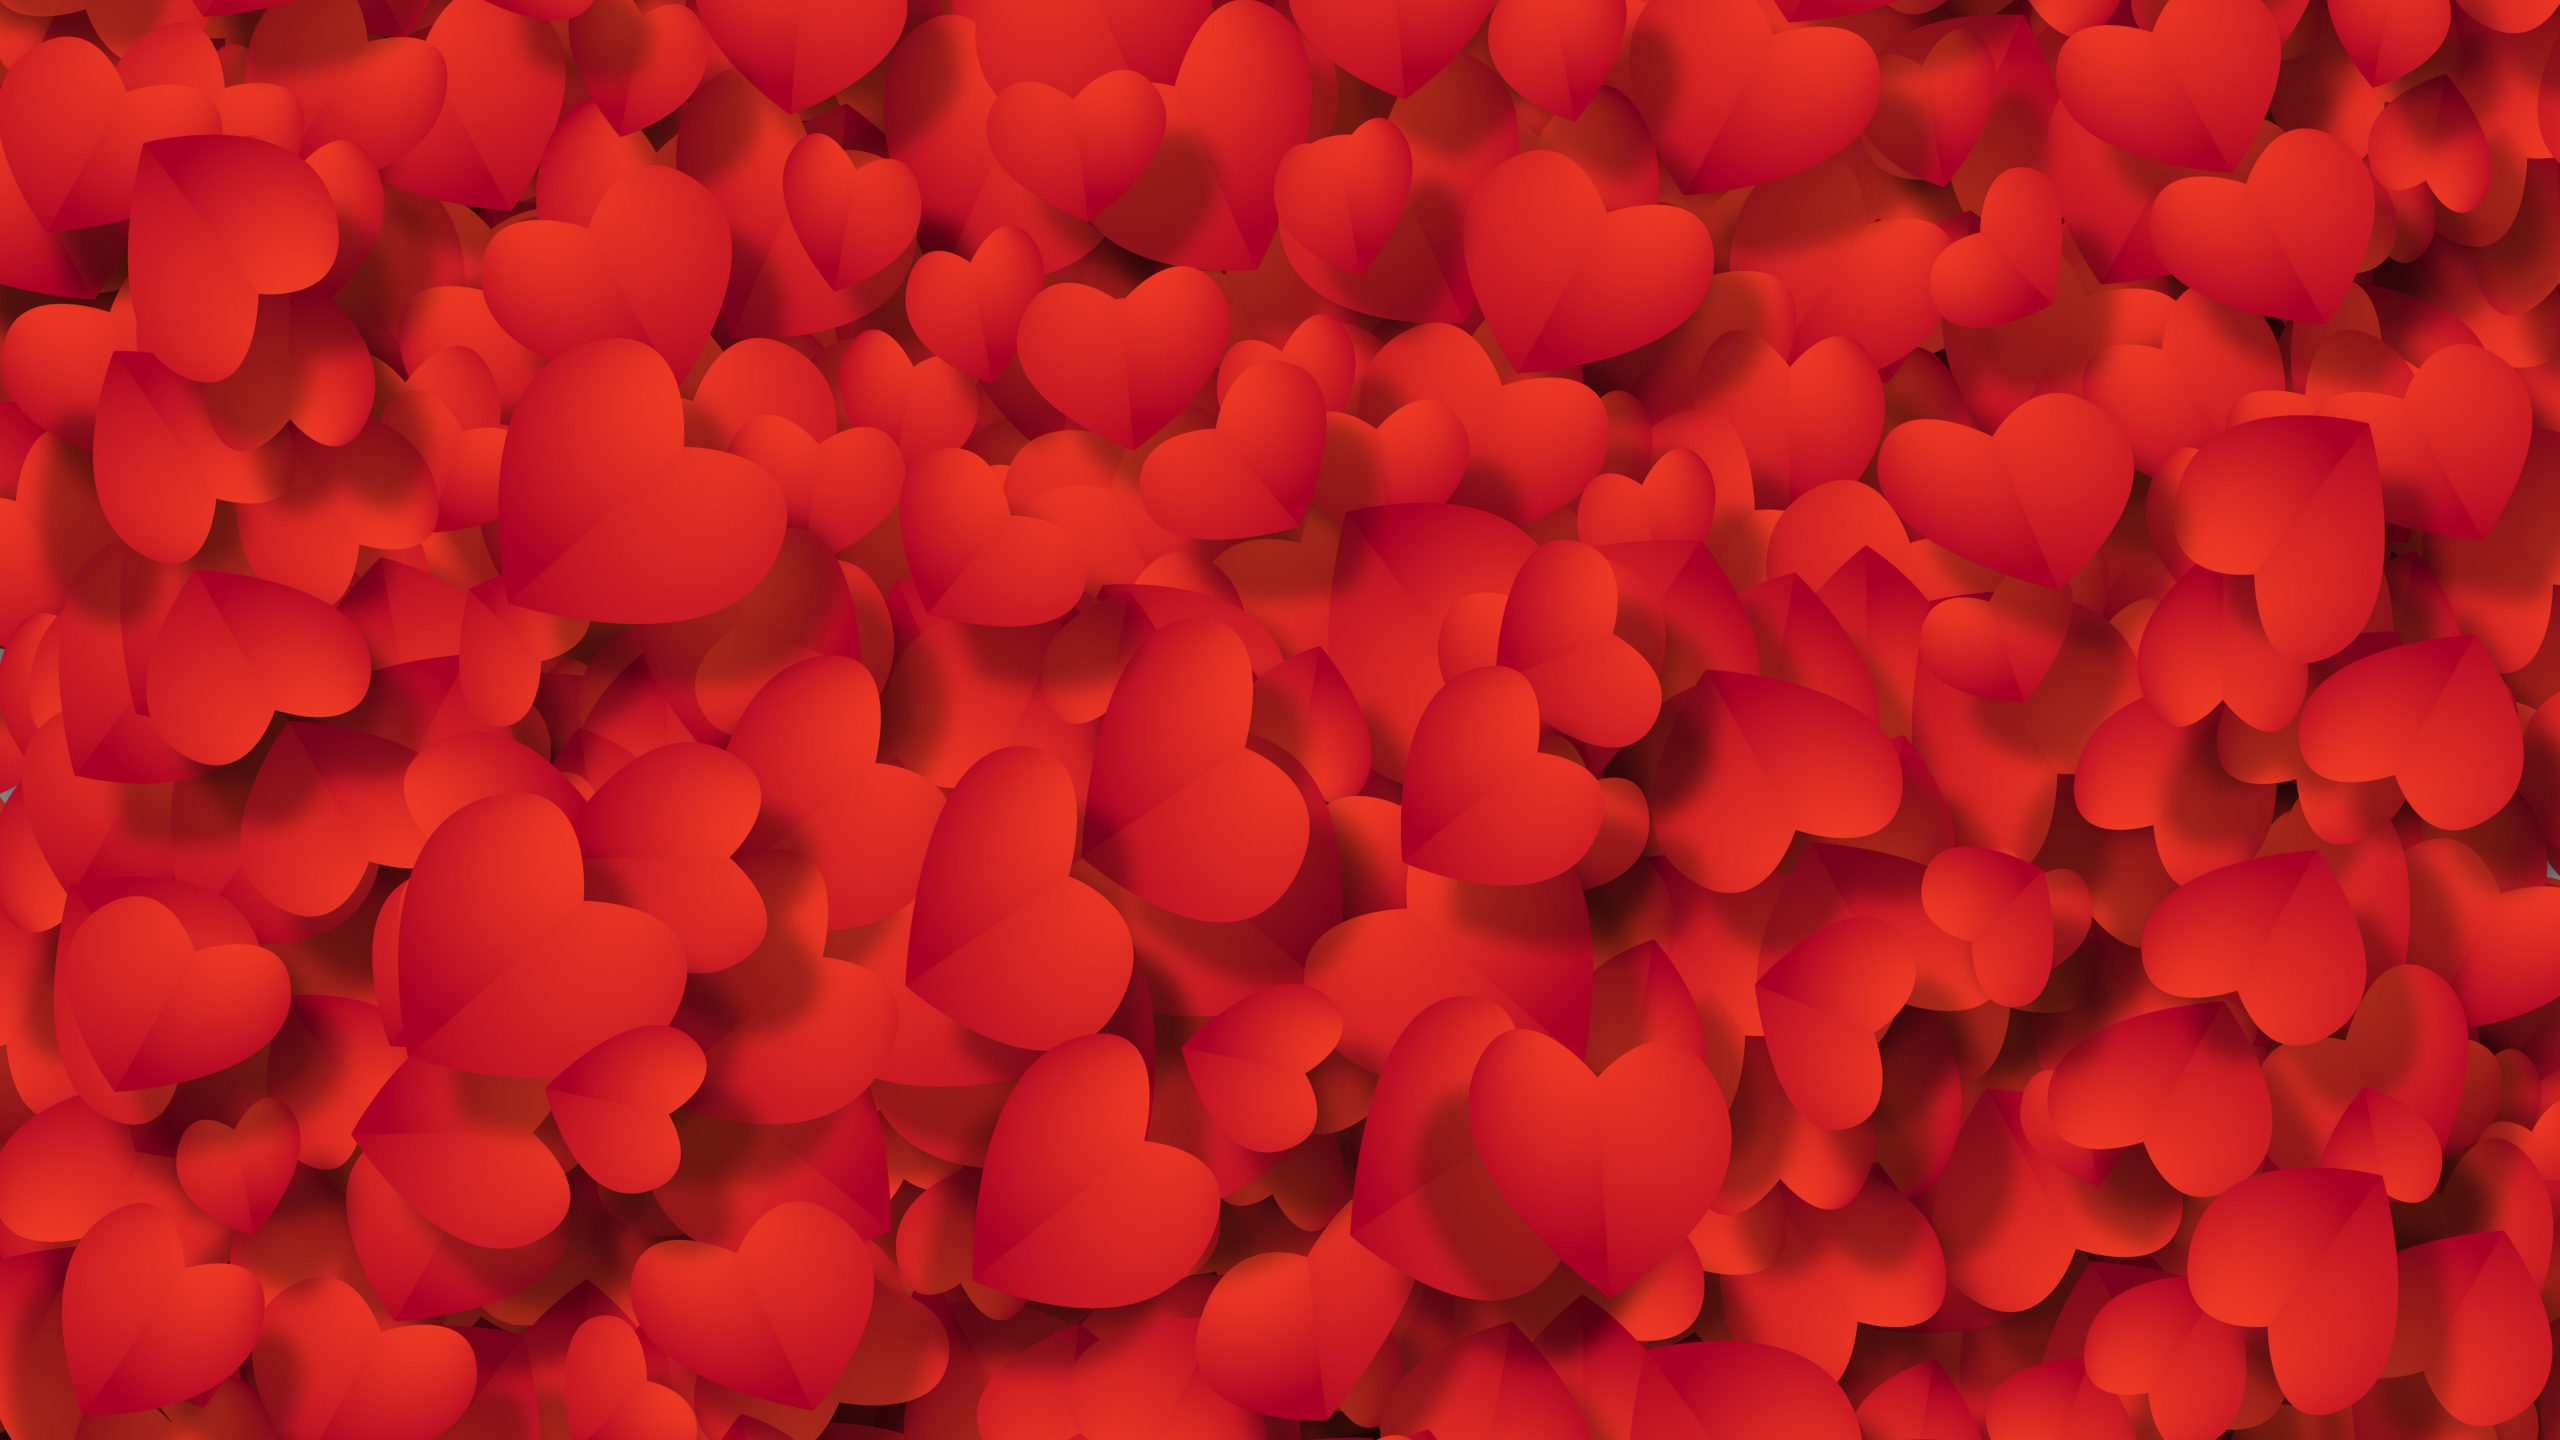 2560x1440 Download red hearts, shape, abstract, love wallpaper, dual wide 16:9 hd image, background, 2400